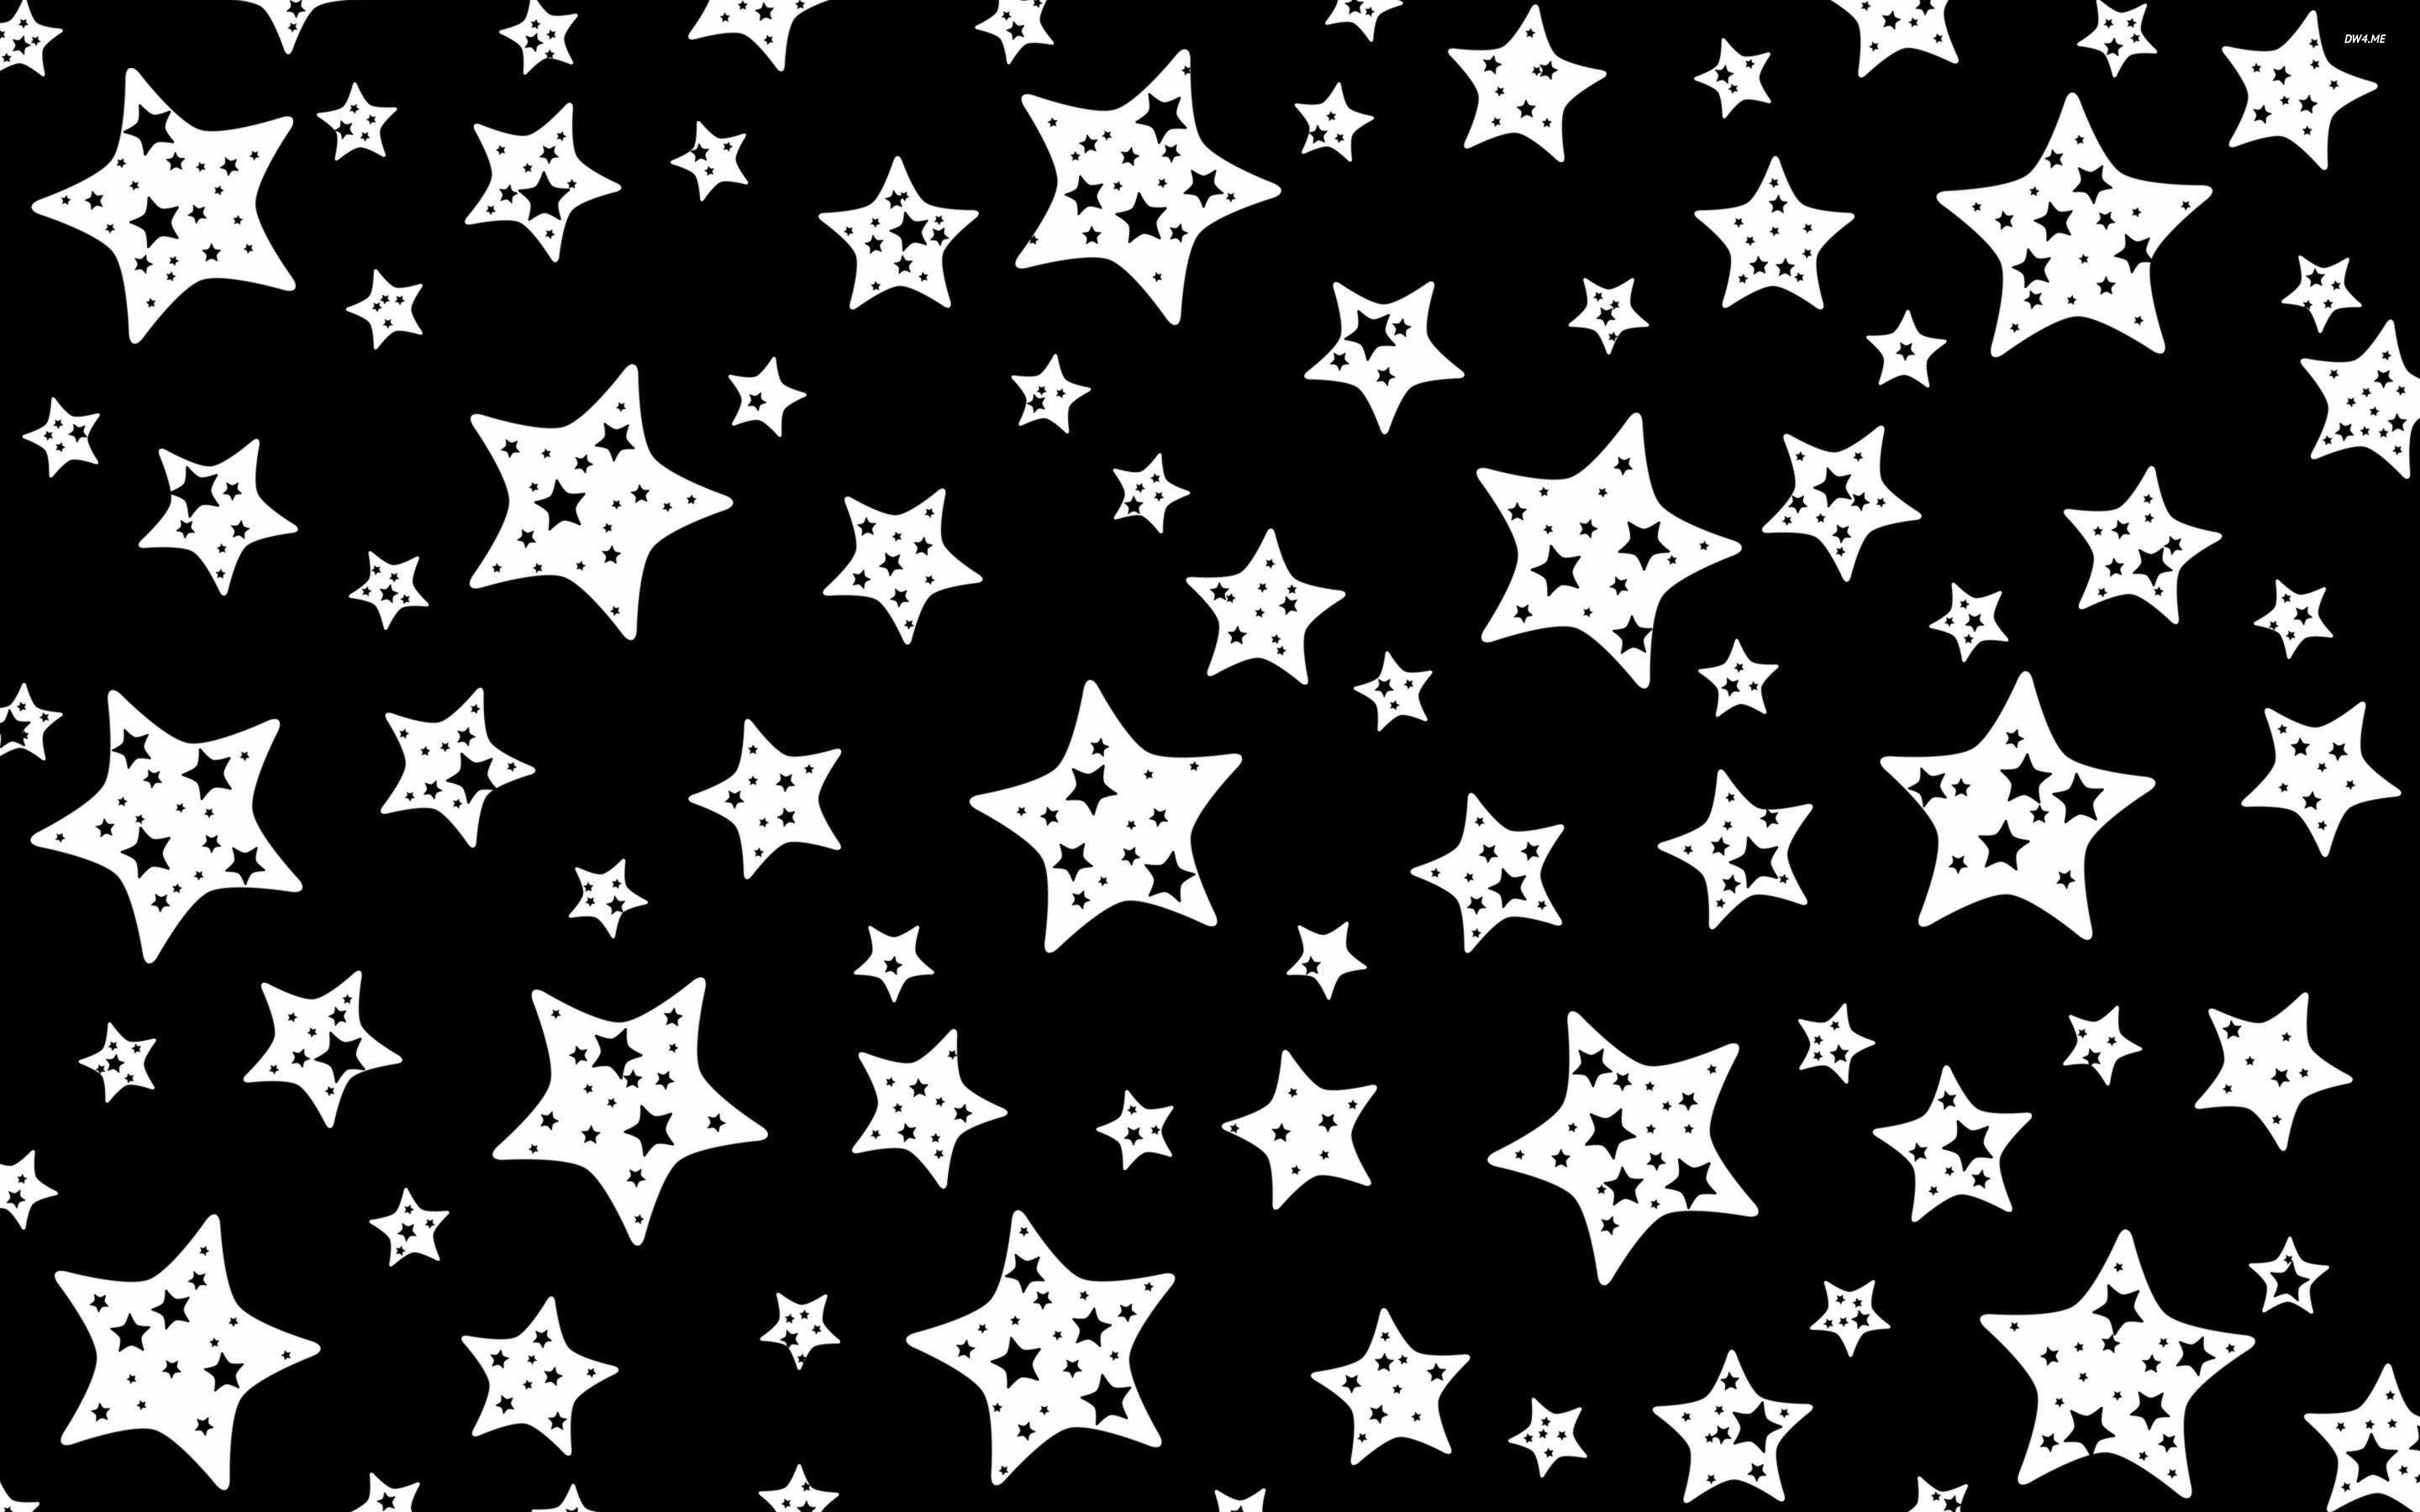 Black and White background TumblrDownload free cool HD